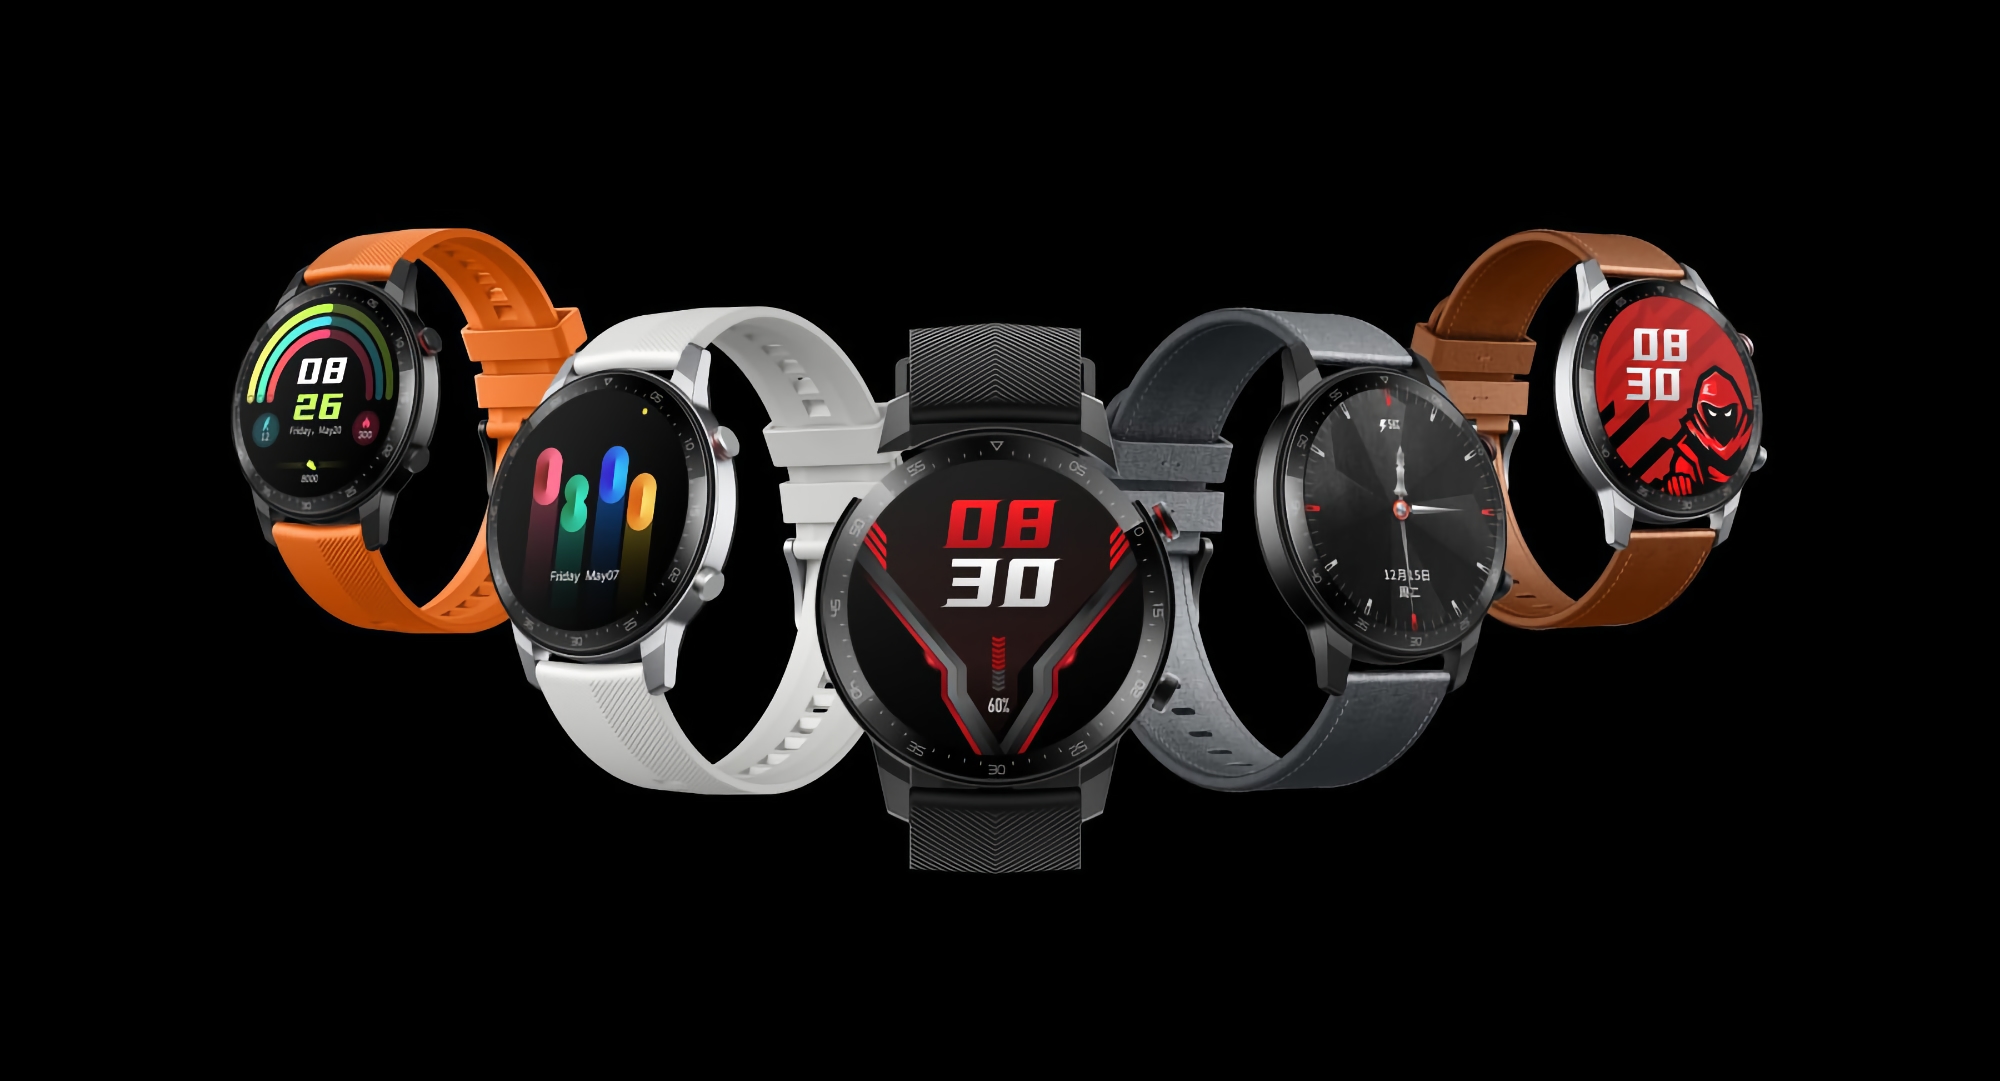 Smart watch Nubia Red Magic Watch with AMOLED screen, GPS and battery life up to 15 days came out on the global market